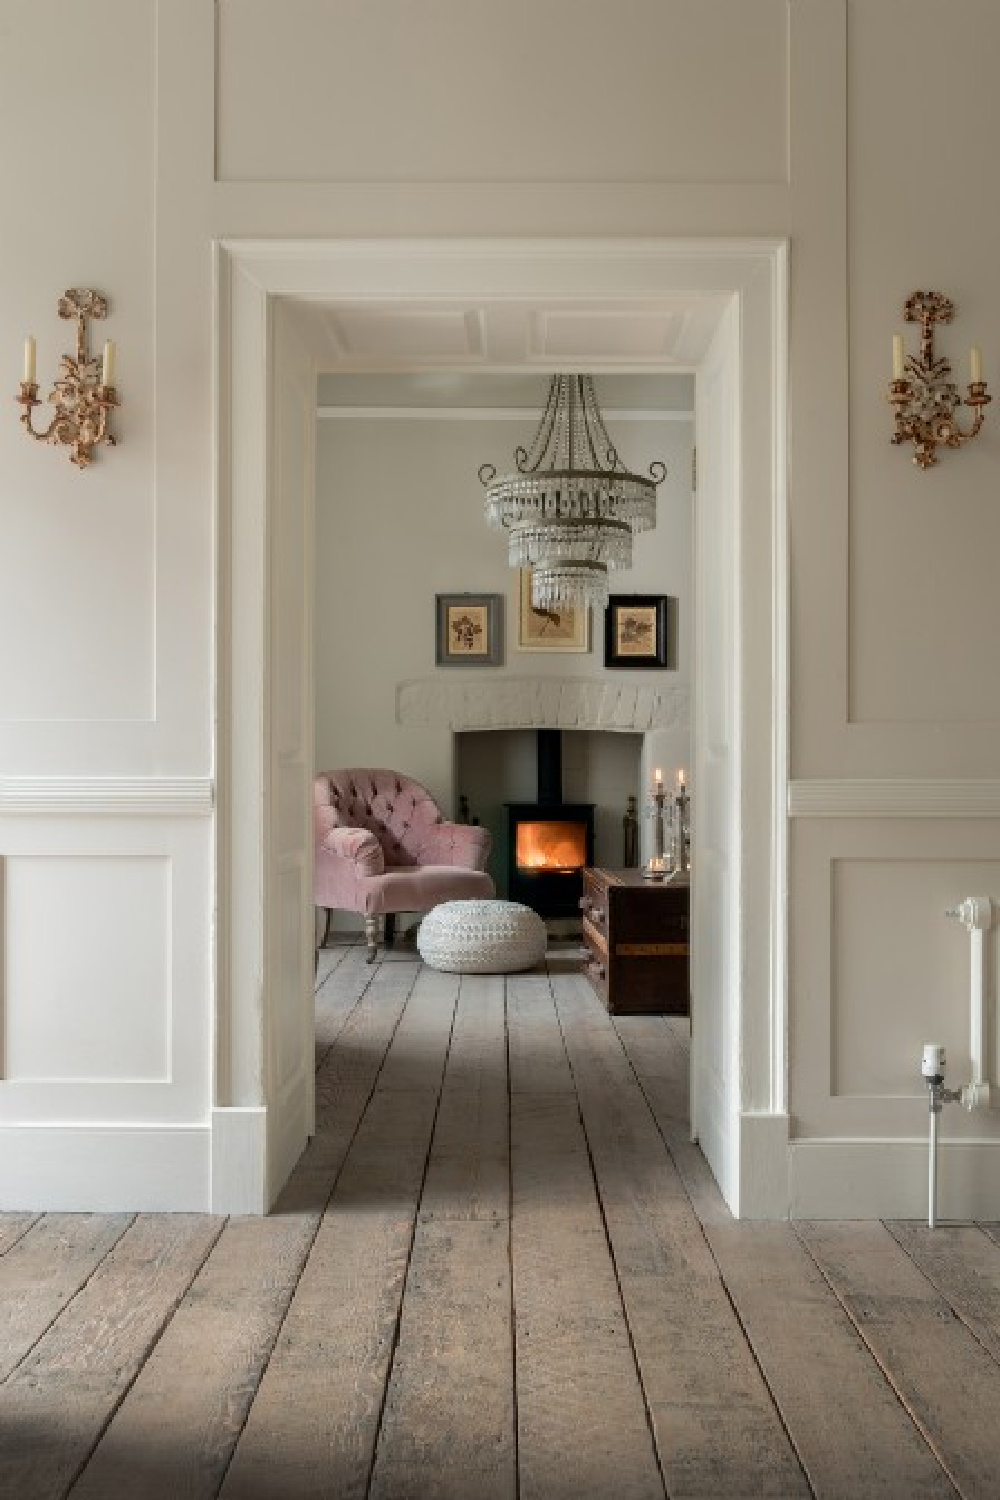 Cozy elegance with crystal chandelier, sconces and paneling - Flower Press holiday rental Biburg Cotswolds. #cotswoldscottage #englishcountry #cottageinteriors